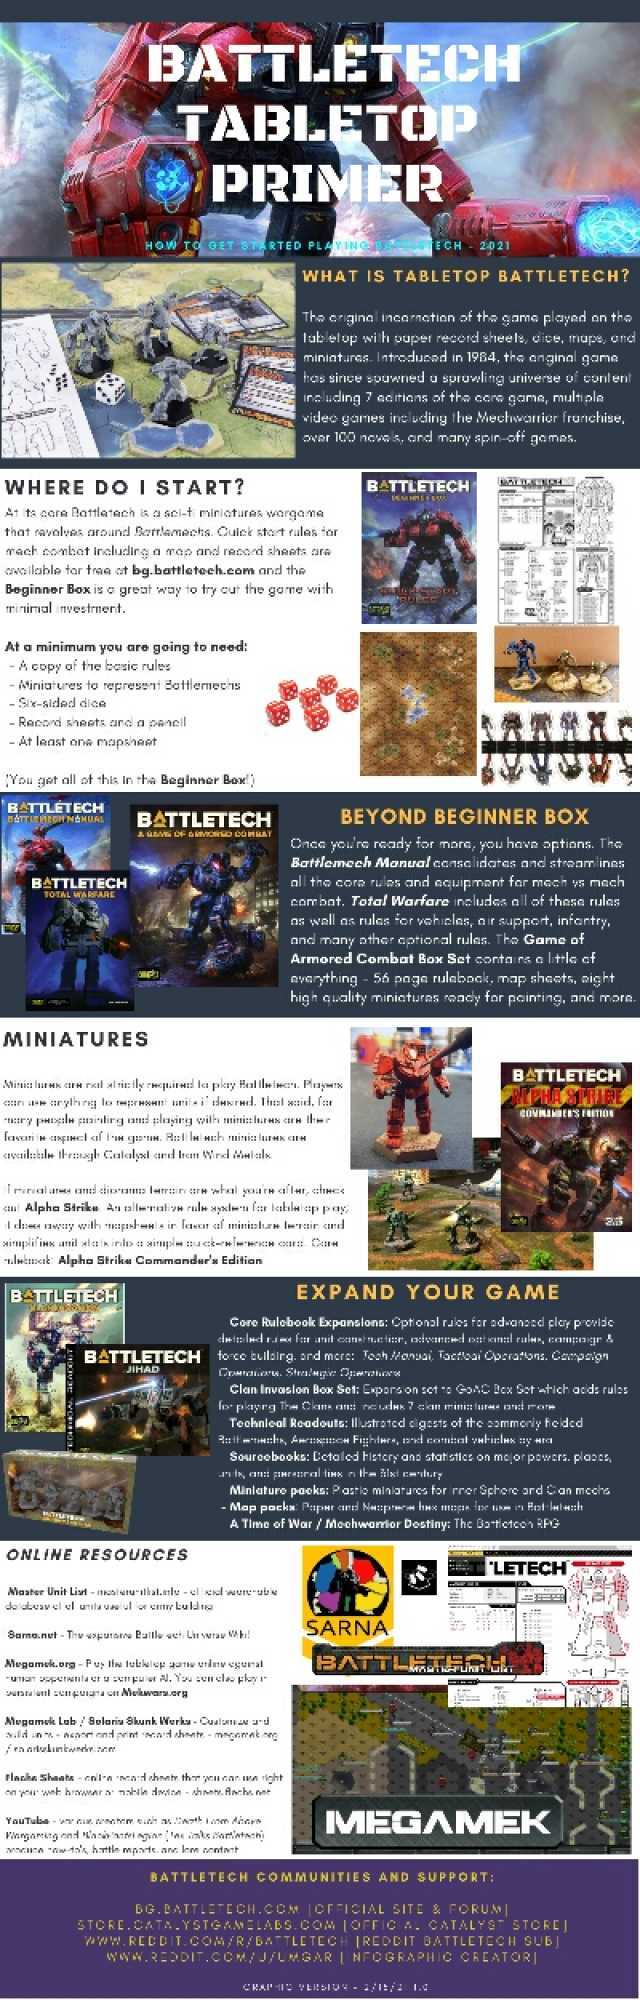 BATTLÉTECH TABLETOP PRIMER HOW TO GET STRTED PLAYIN ECH 2021 WHAT IS TABLETOP BATTLETECH The original incarnation of the game played on the tabletop with paper record sheets dice maps and miniatures. Introduced in 1984 the origin